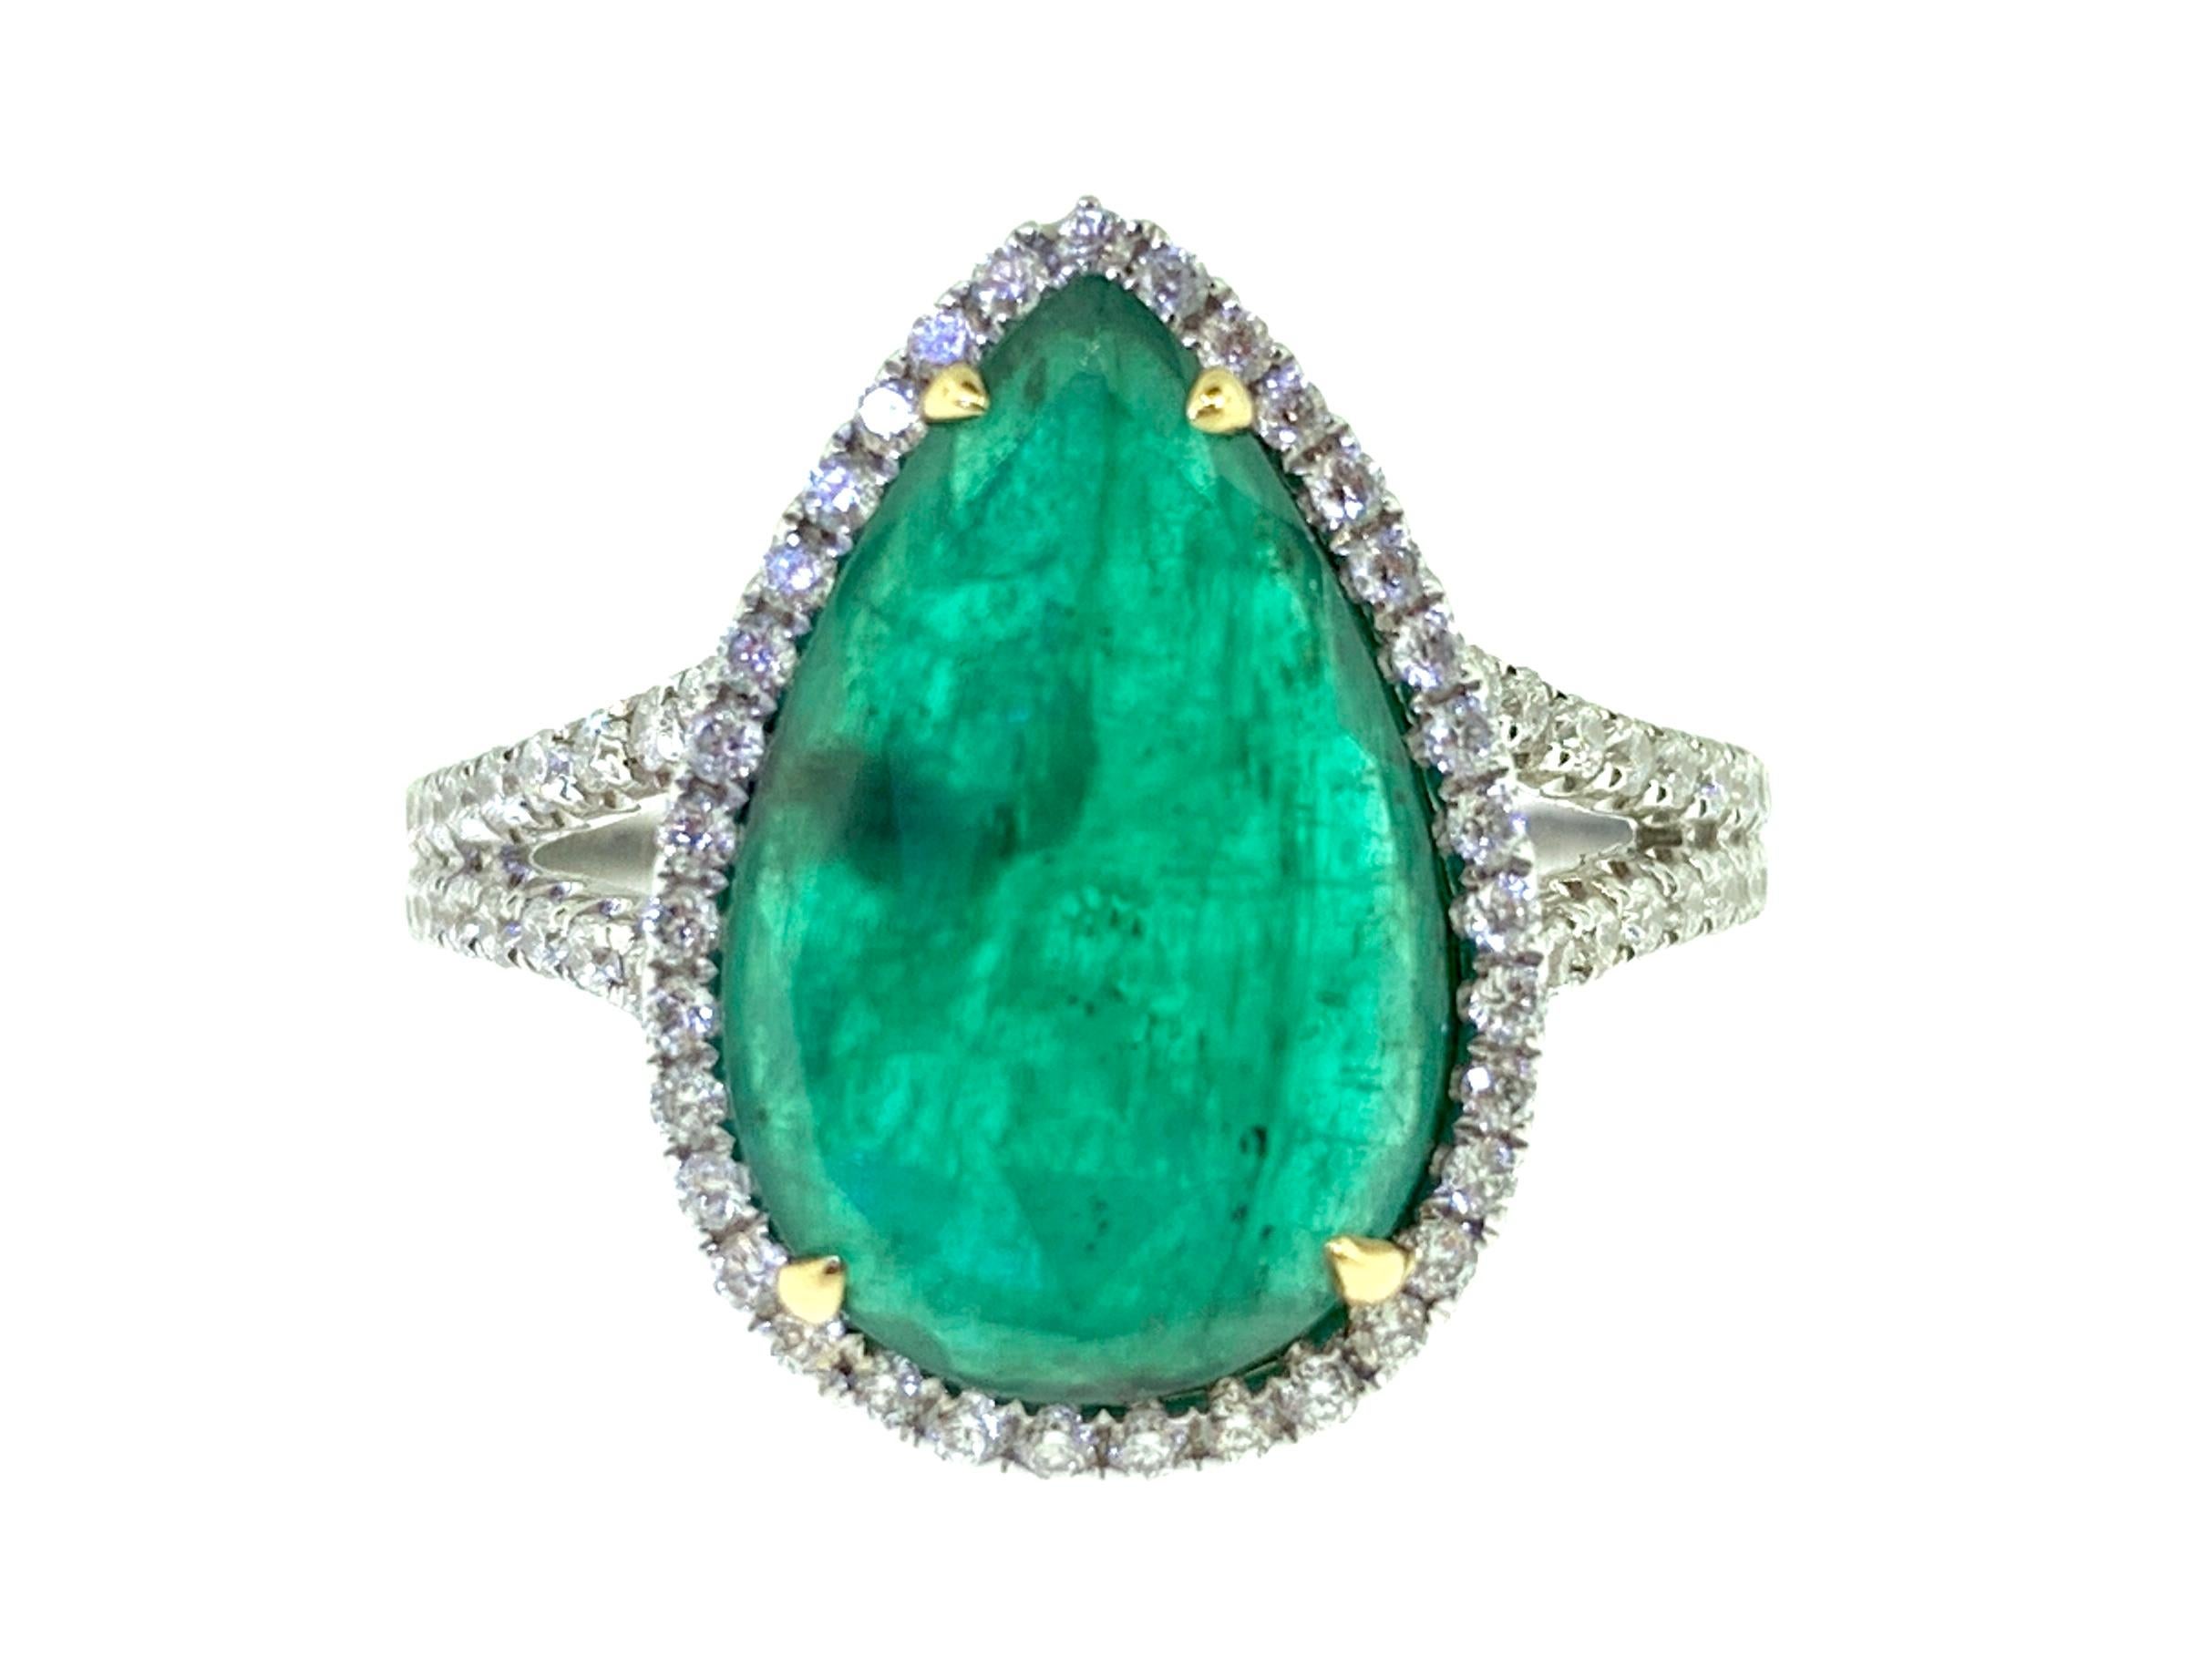 This stunning cocktail ring features a beautiful 3.84 Carat Pear Shape Emerald with a Diamond Halo on a Double Diamond Shank. This ring is set in 18k White Gold with 18k Yellow Gold Prongs on the center stone. 
Total Diamond Weight = 0.44 Carats.